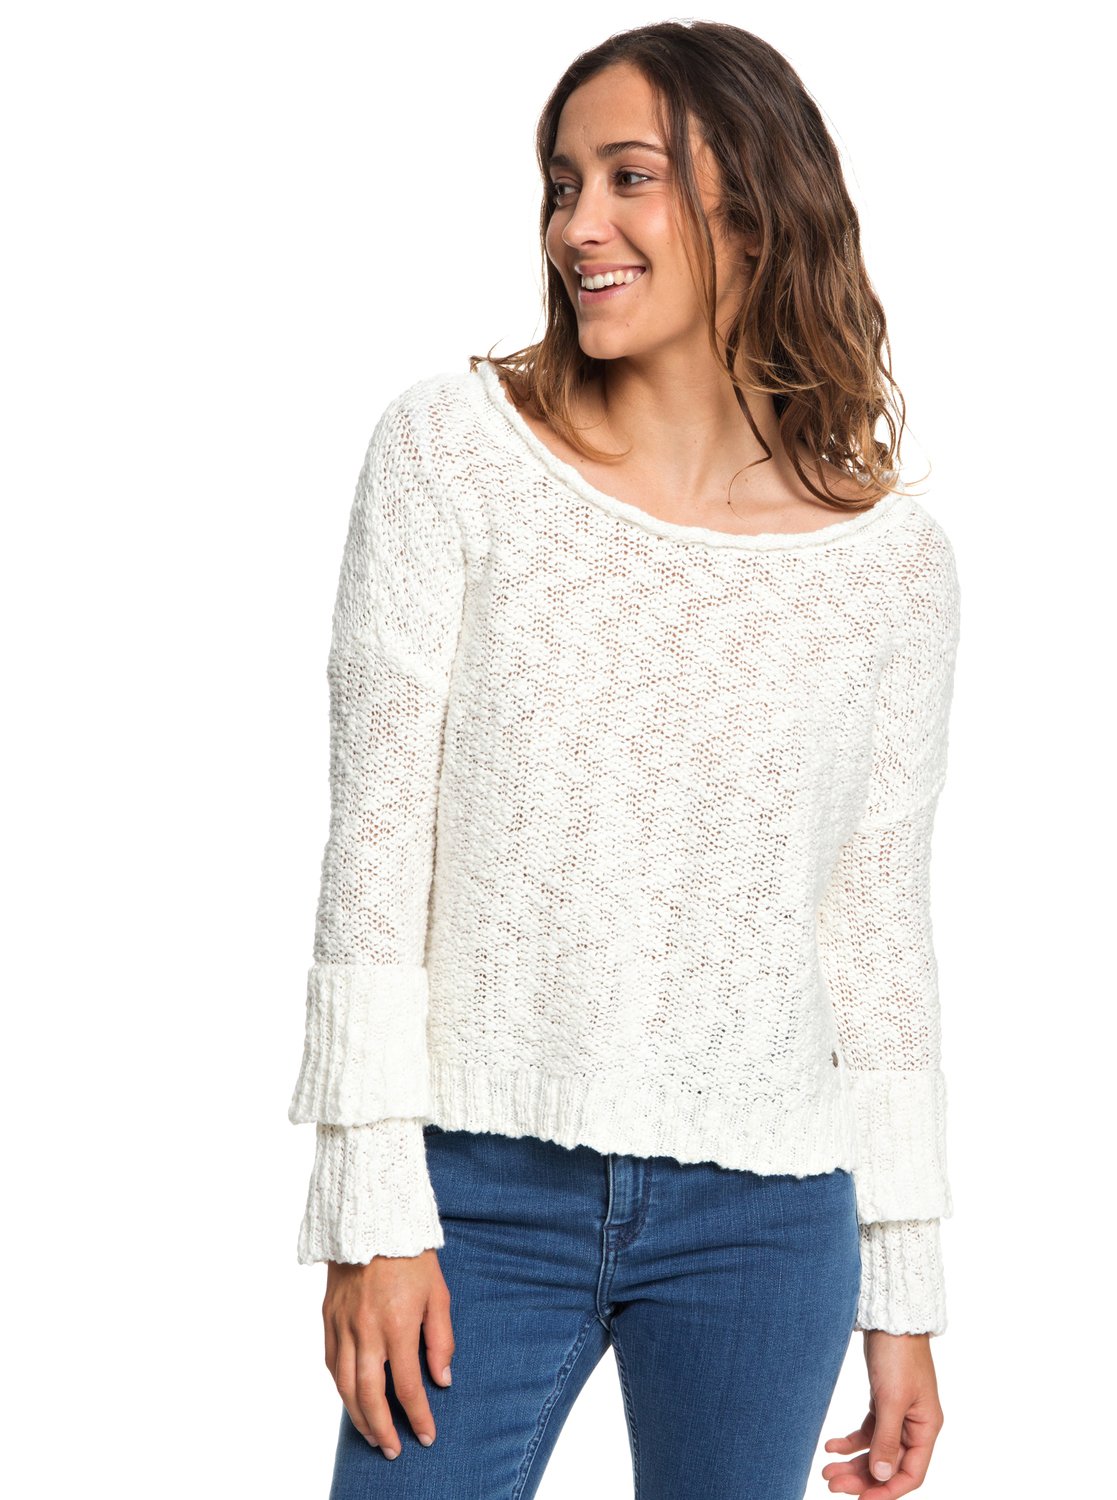 Ruffle Party Sweater